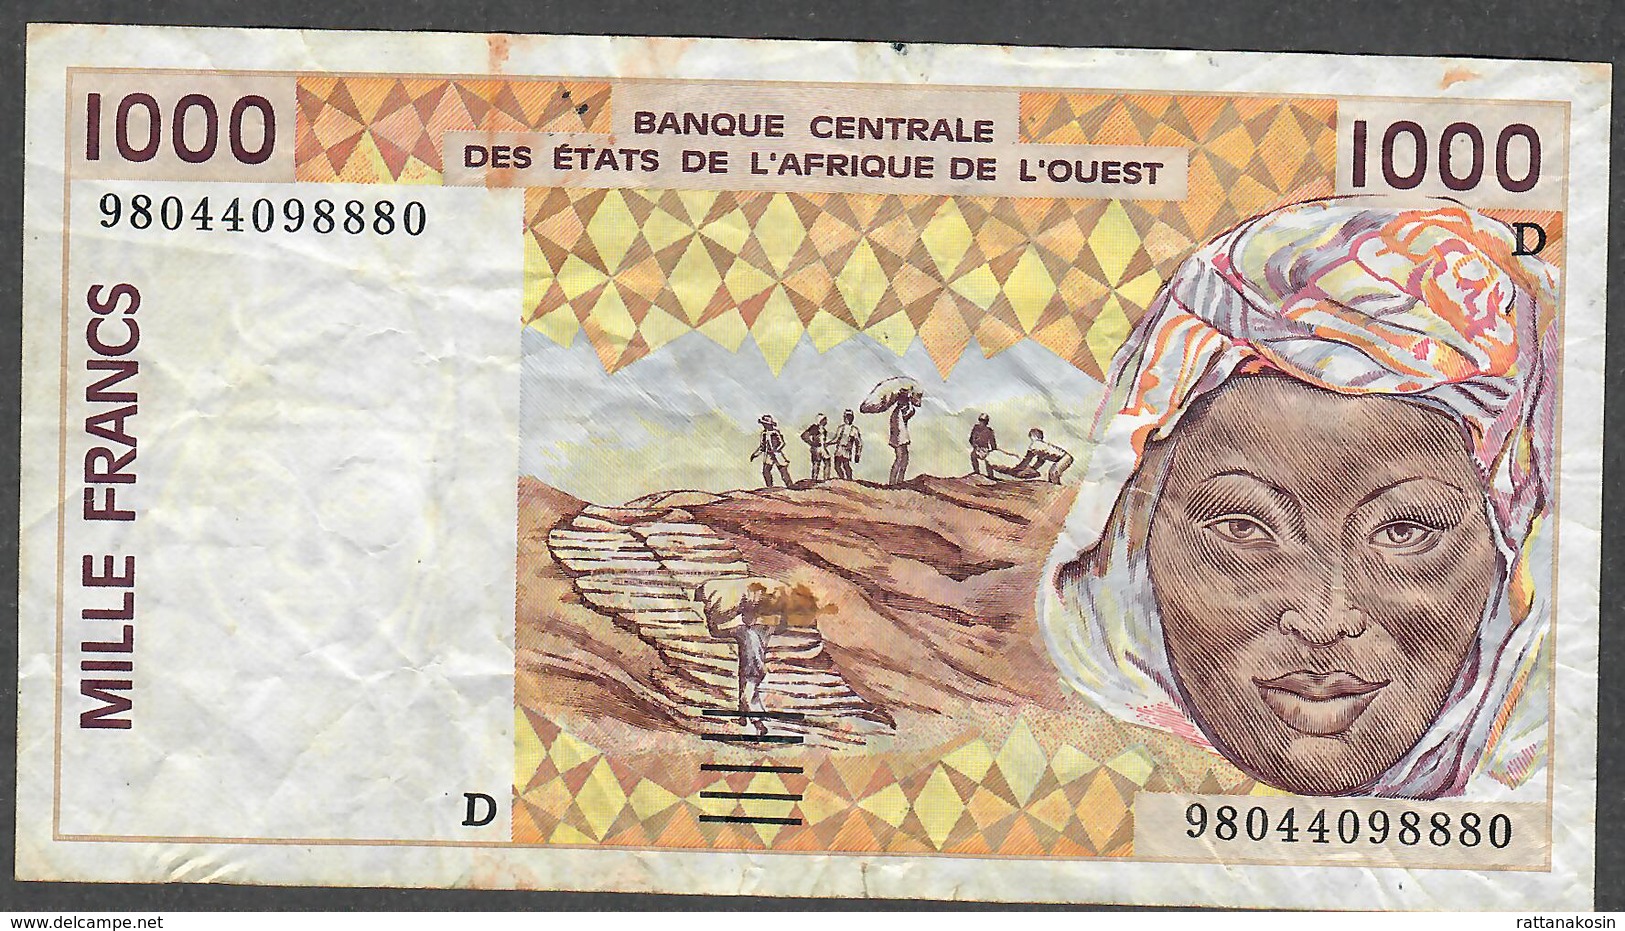 W.A.S. LETTER D MALI  P411Dh  1000 FRANCS (19)98 VF NO P.h. ! - Stati Dell'Africa Occidentale